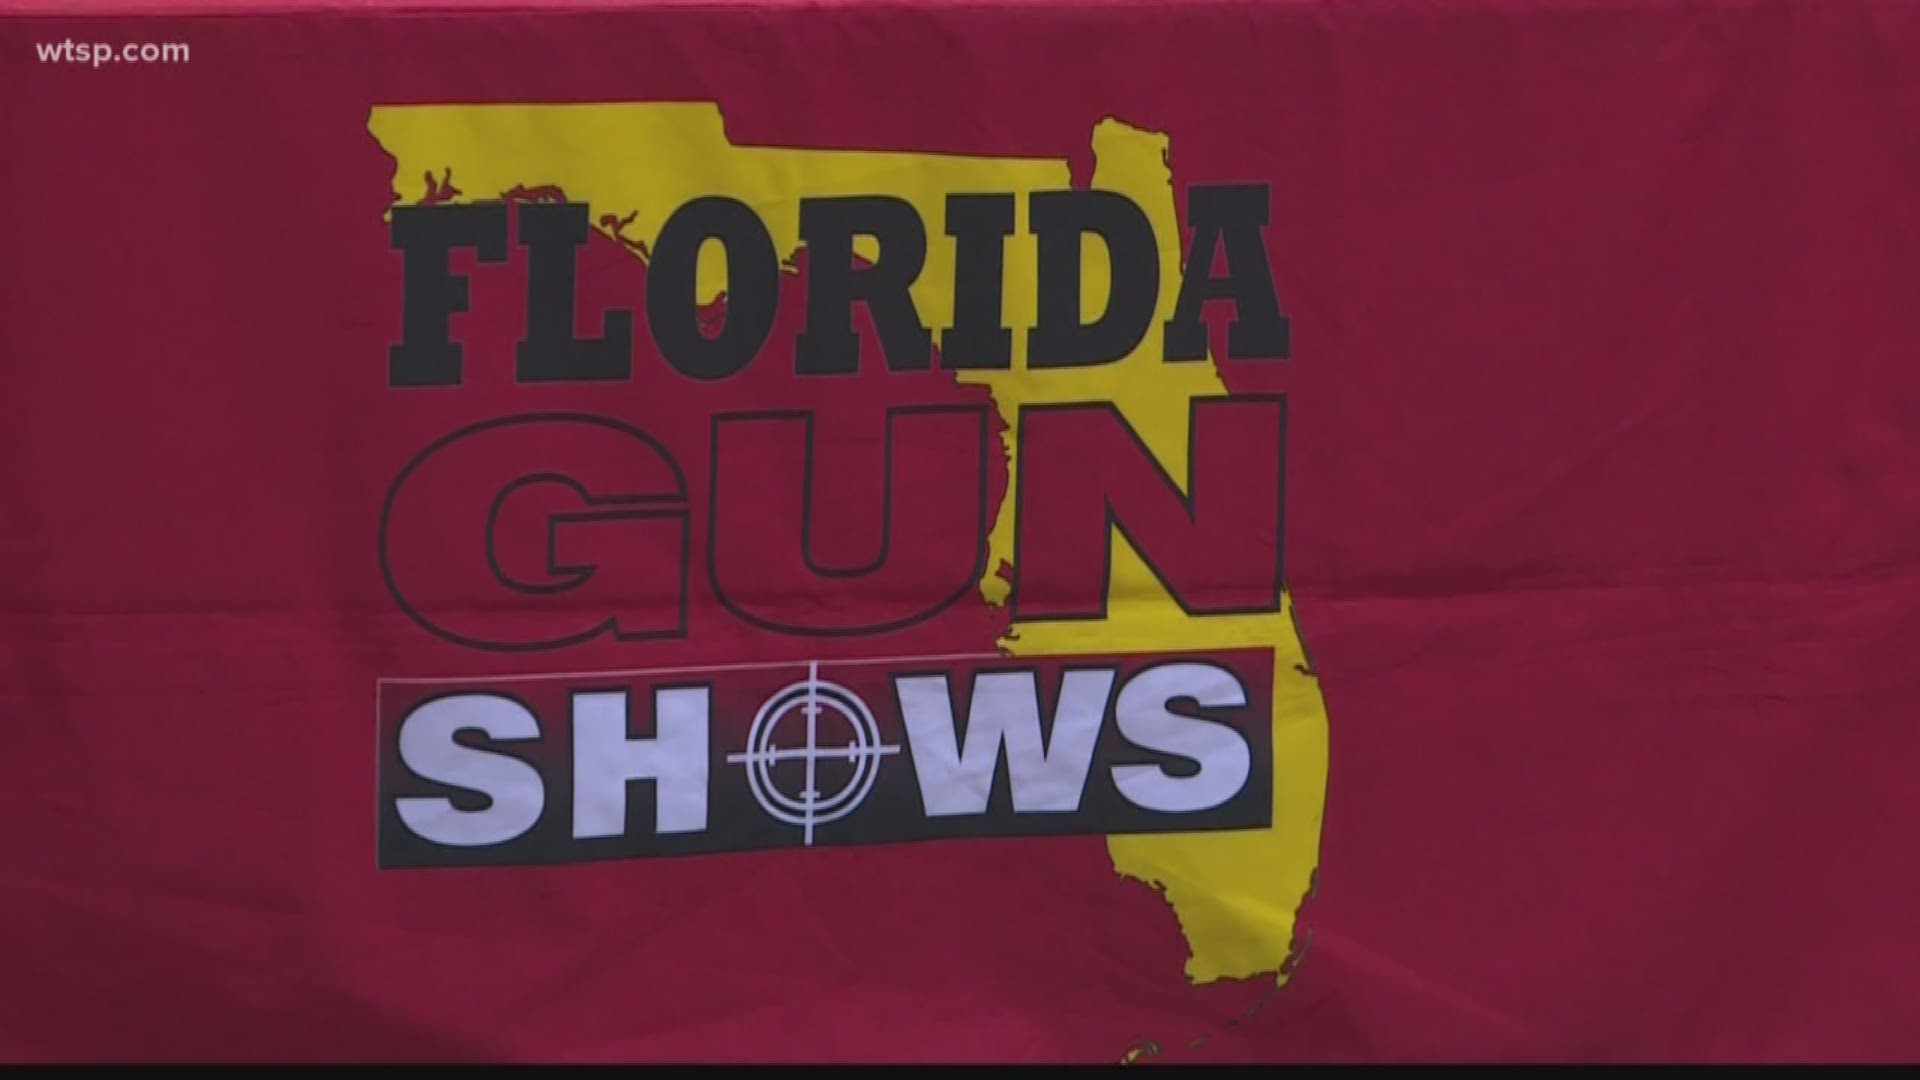 In Florida, conservative state senators looked like they were ready to pass a bill that would require mandatory background checks by closing the so-called "gun show